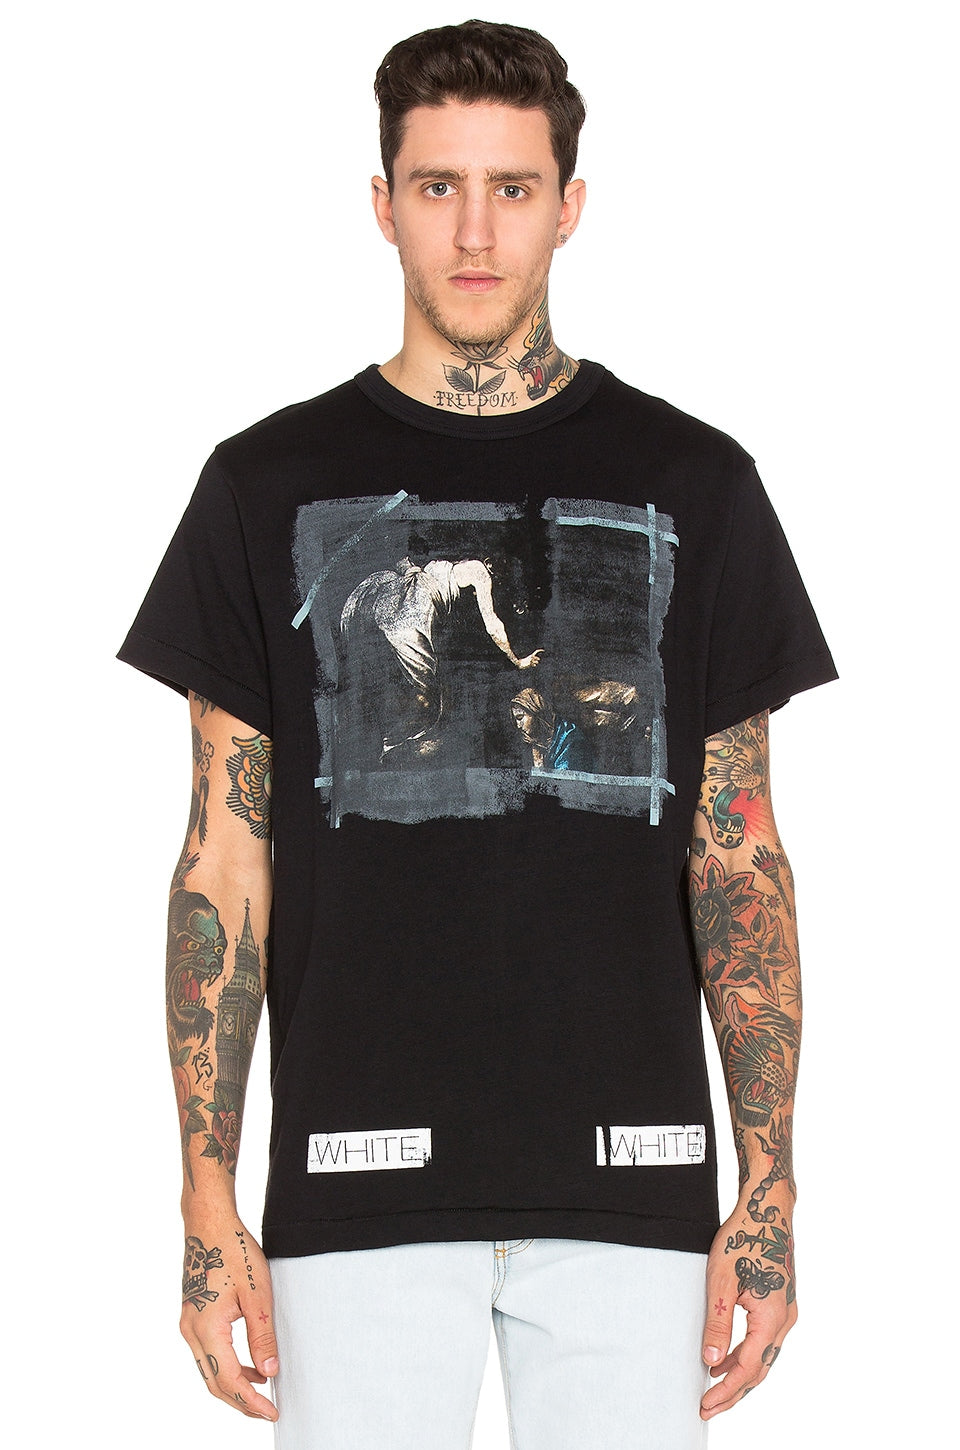 Off White Caravaggio Annunciation T-Shirt (Black) - Shop Streetwear, Sneakers, Slippers and Gifts online | Malaysia - The Factory KL